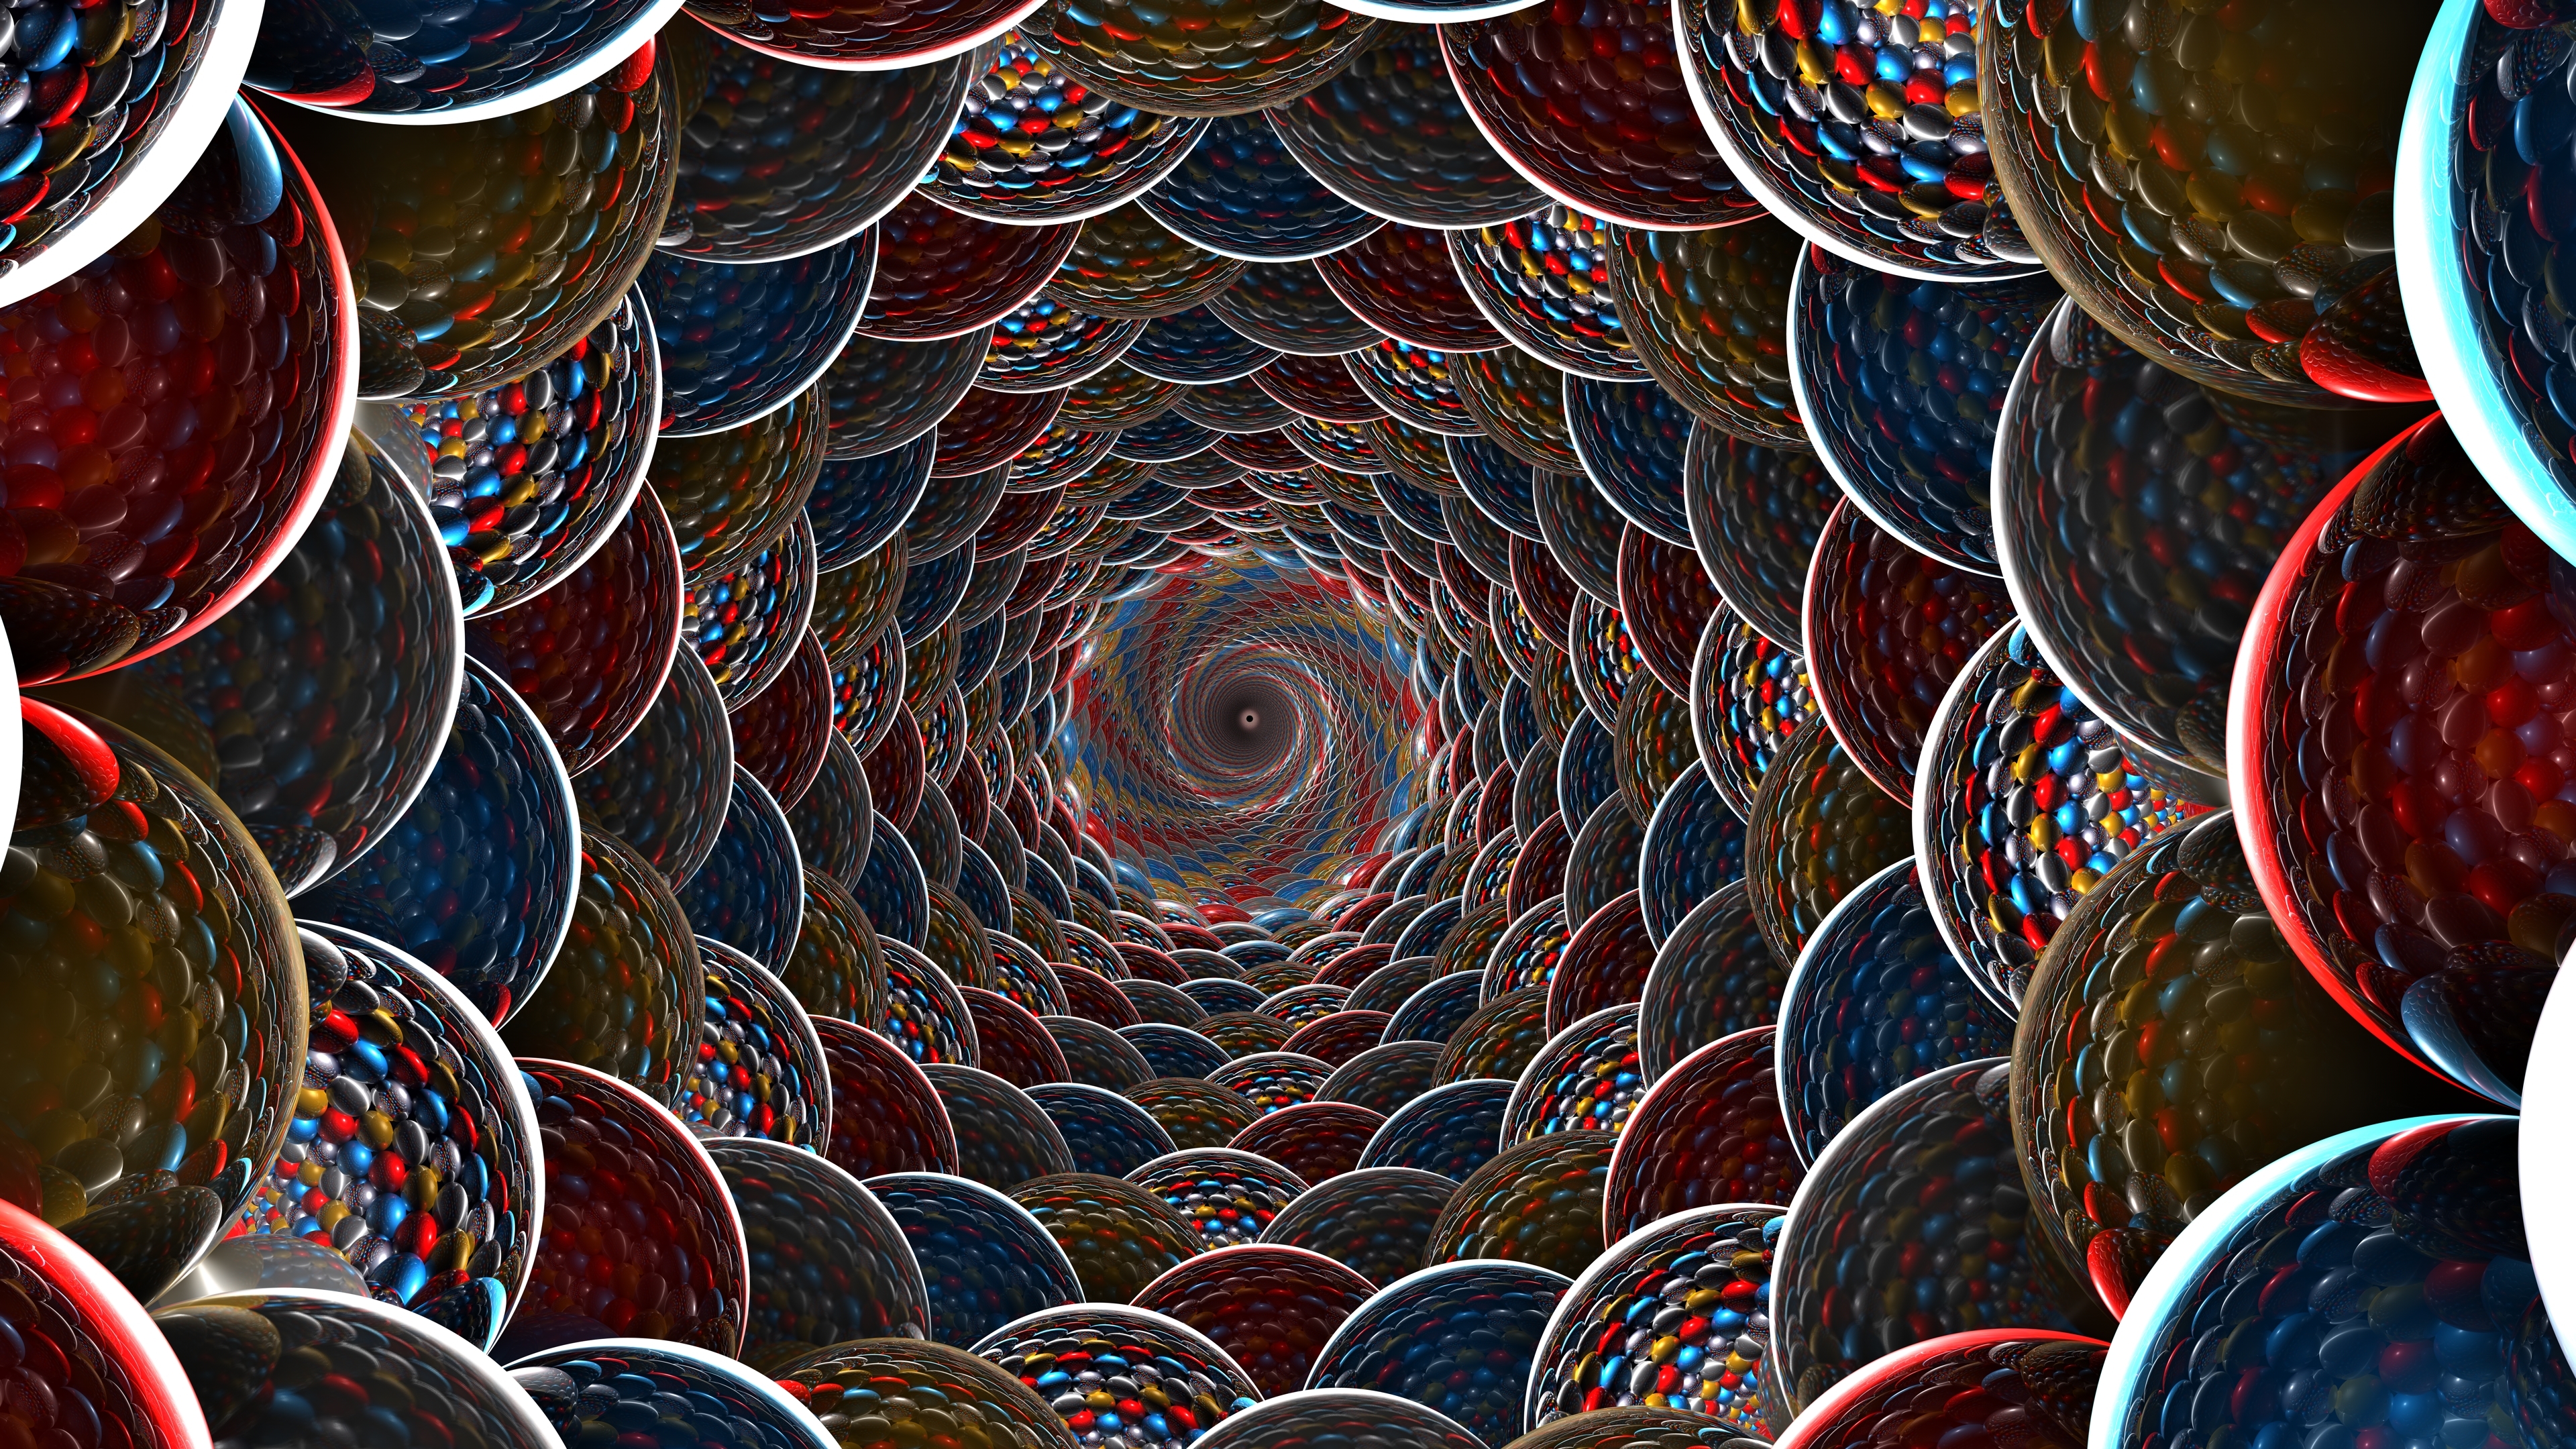 3d, sphere, abstract, blue, colorful, red, cgi, circle, colors, swirl cellphone